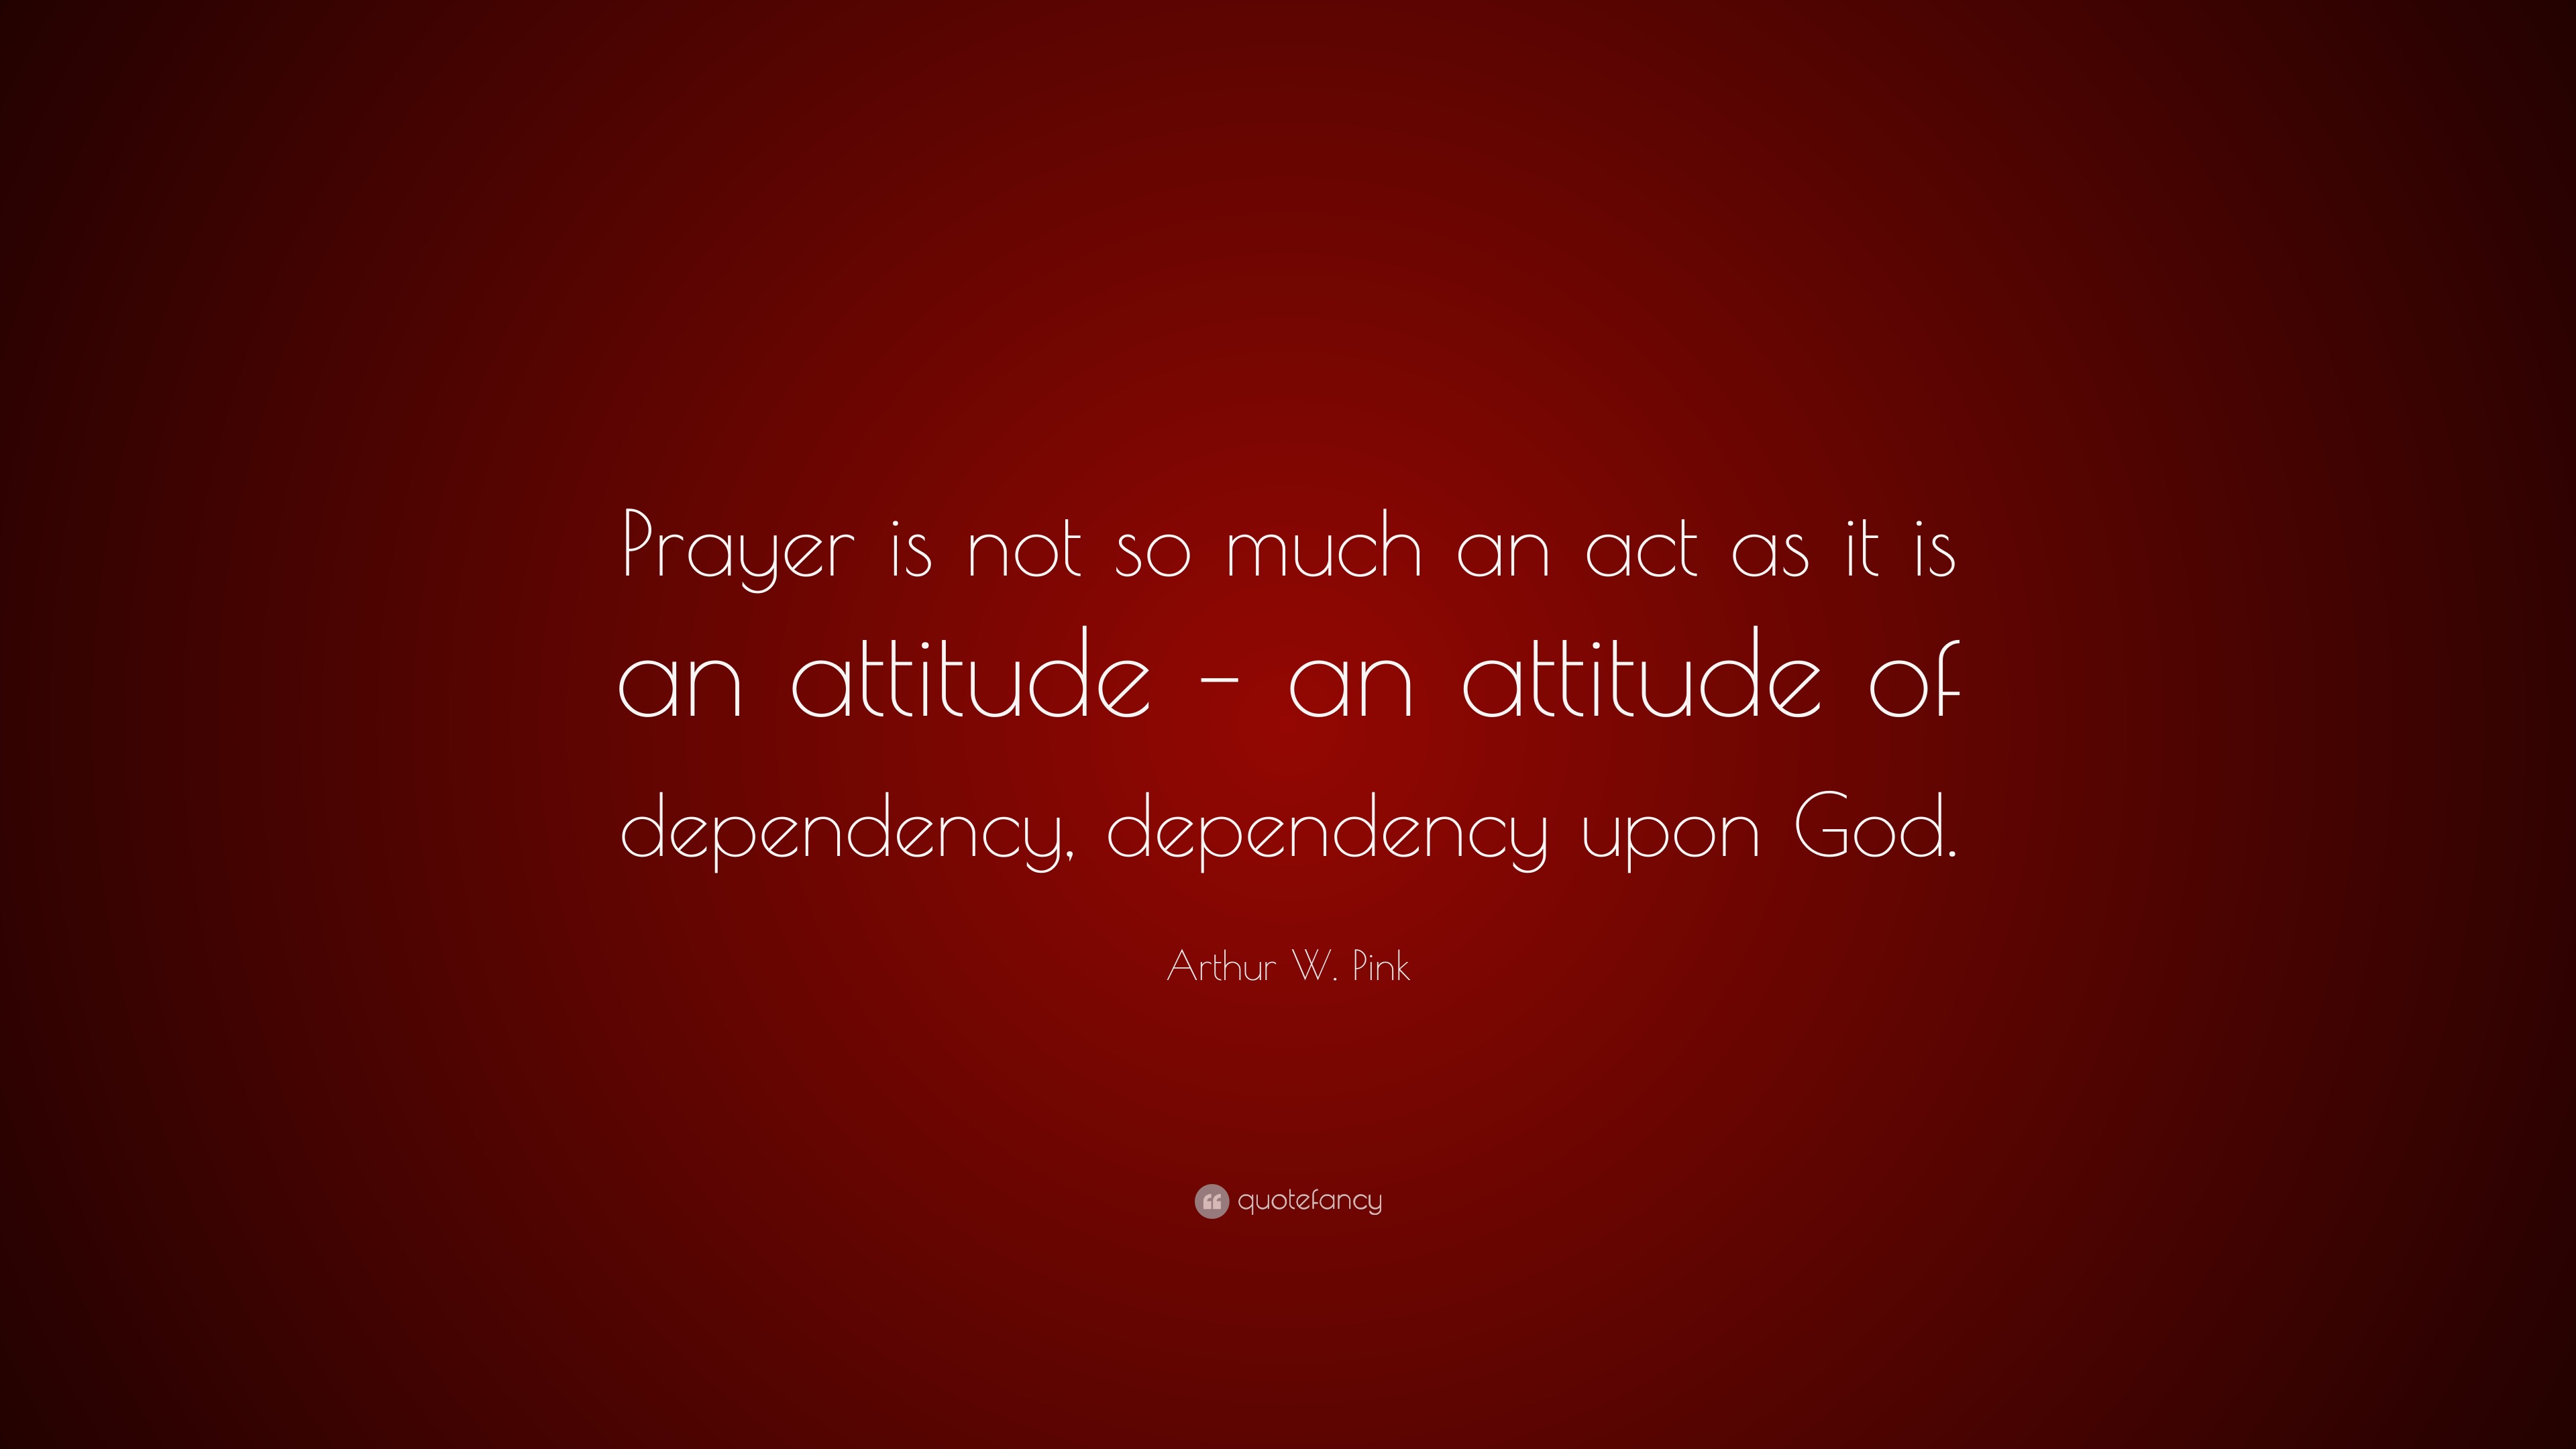 Arthur W. Pink Quote: “Prayer is not so much an act as it is an ...